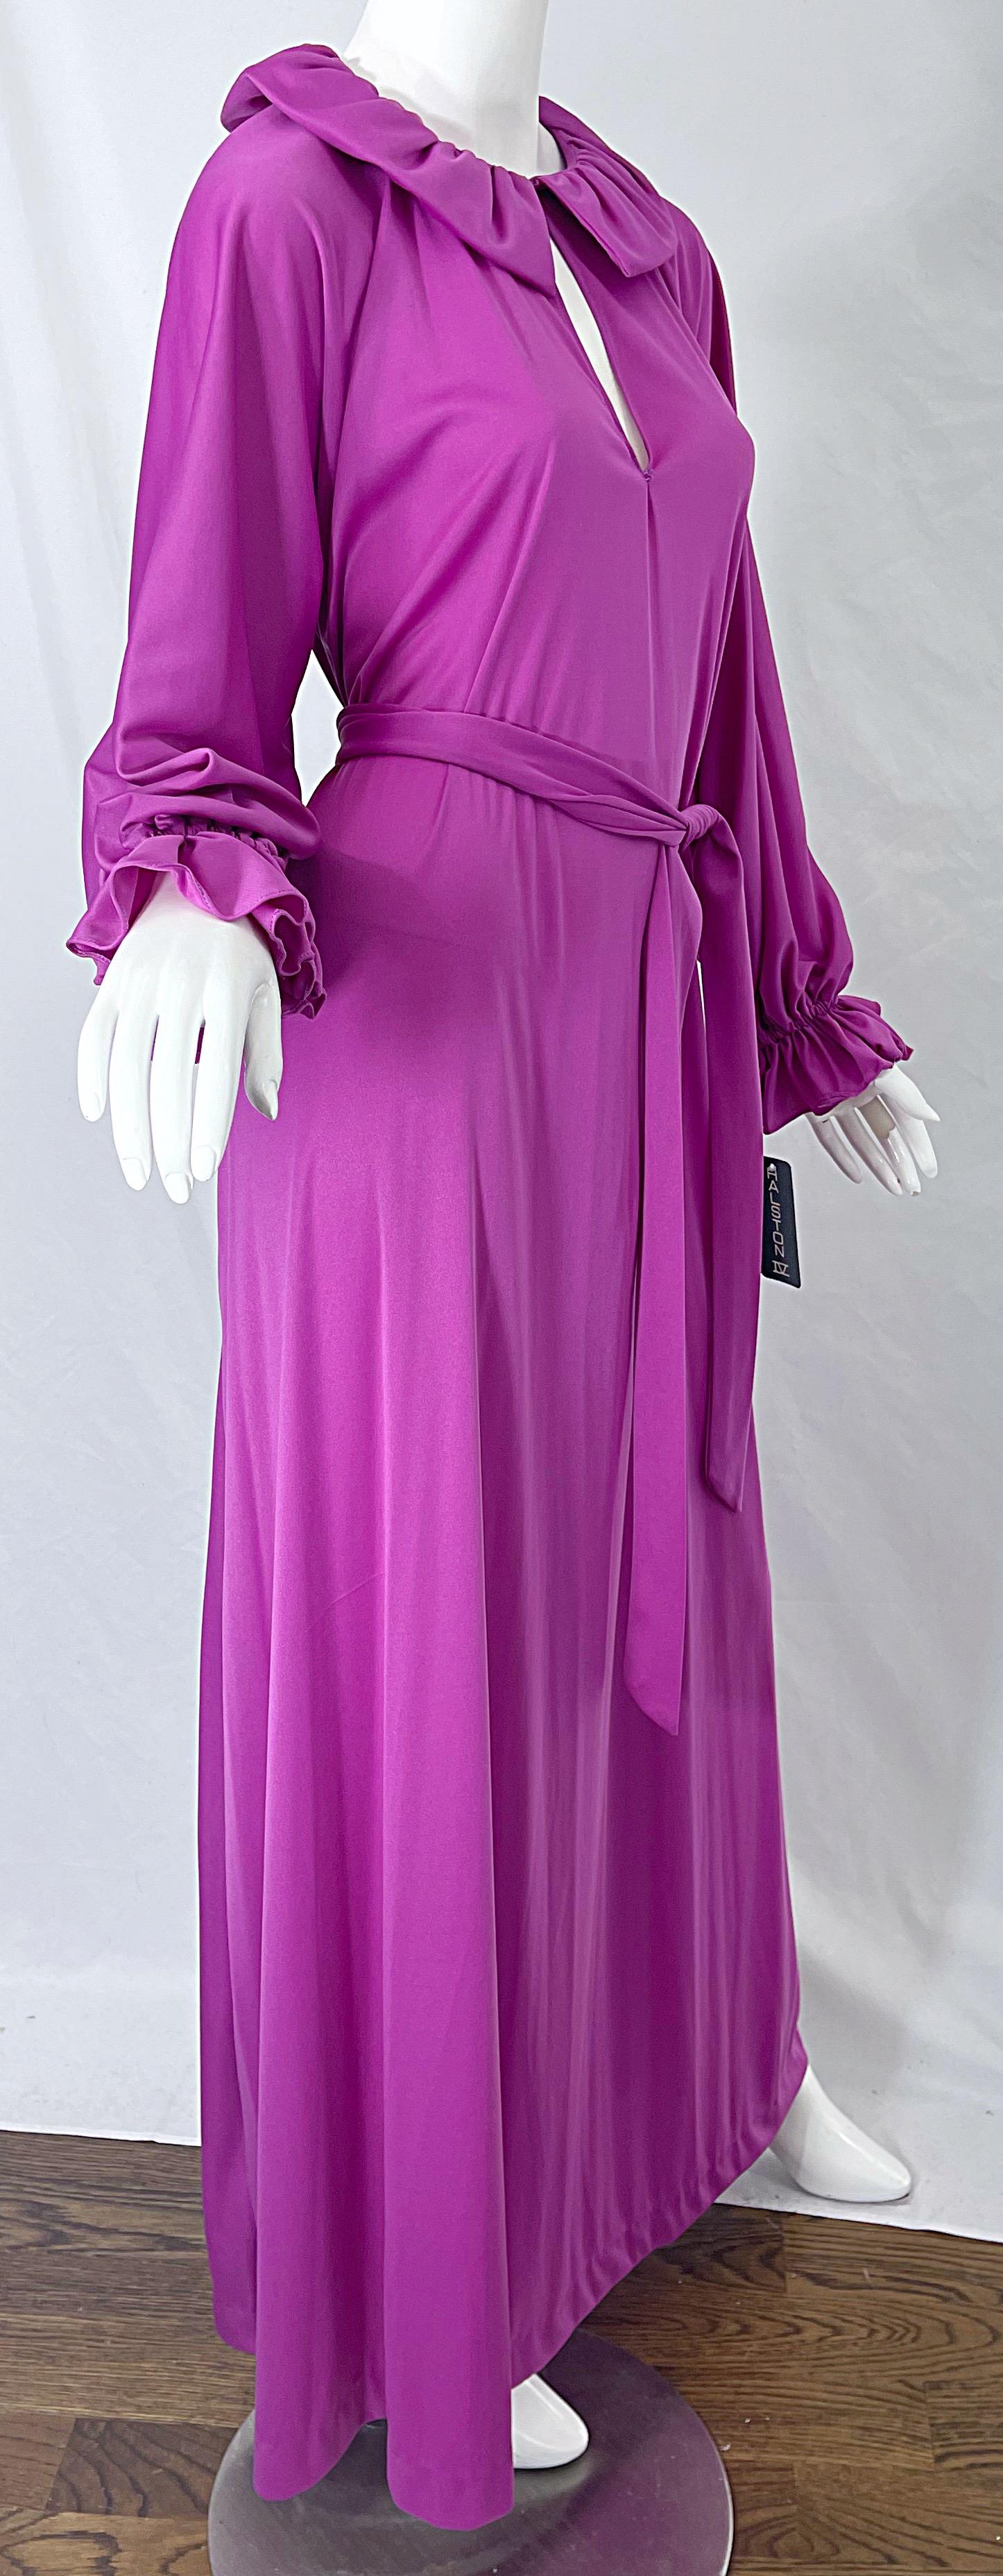 NWT 1970s Halston IV Purple / Pink One Size Fits All Vintage 70s Maxi Dress For Sale 5